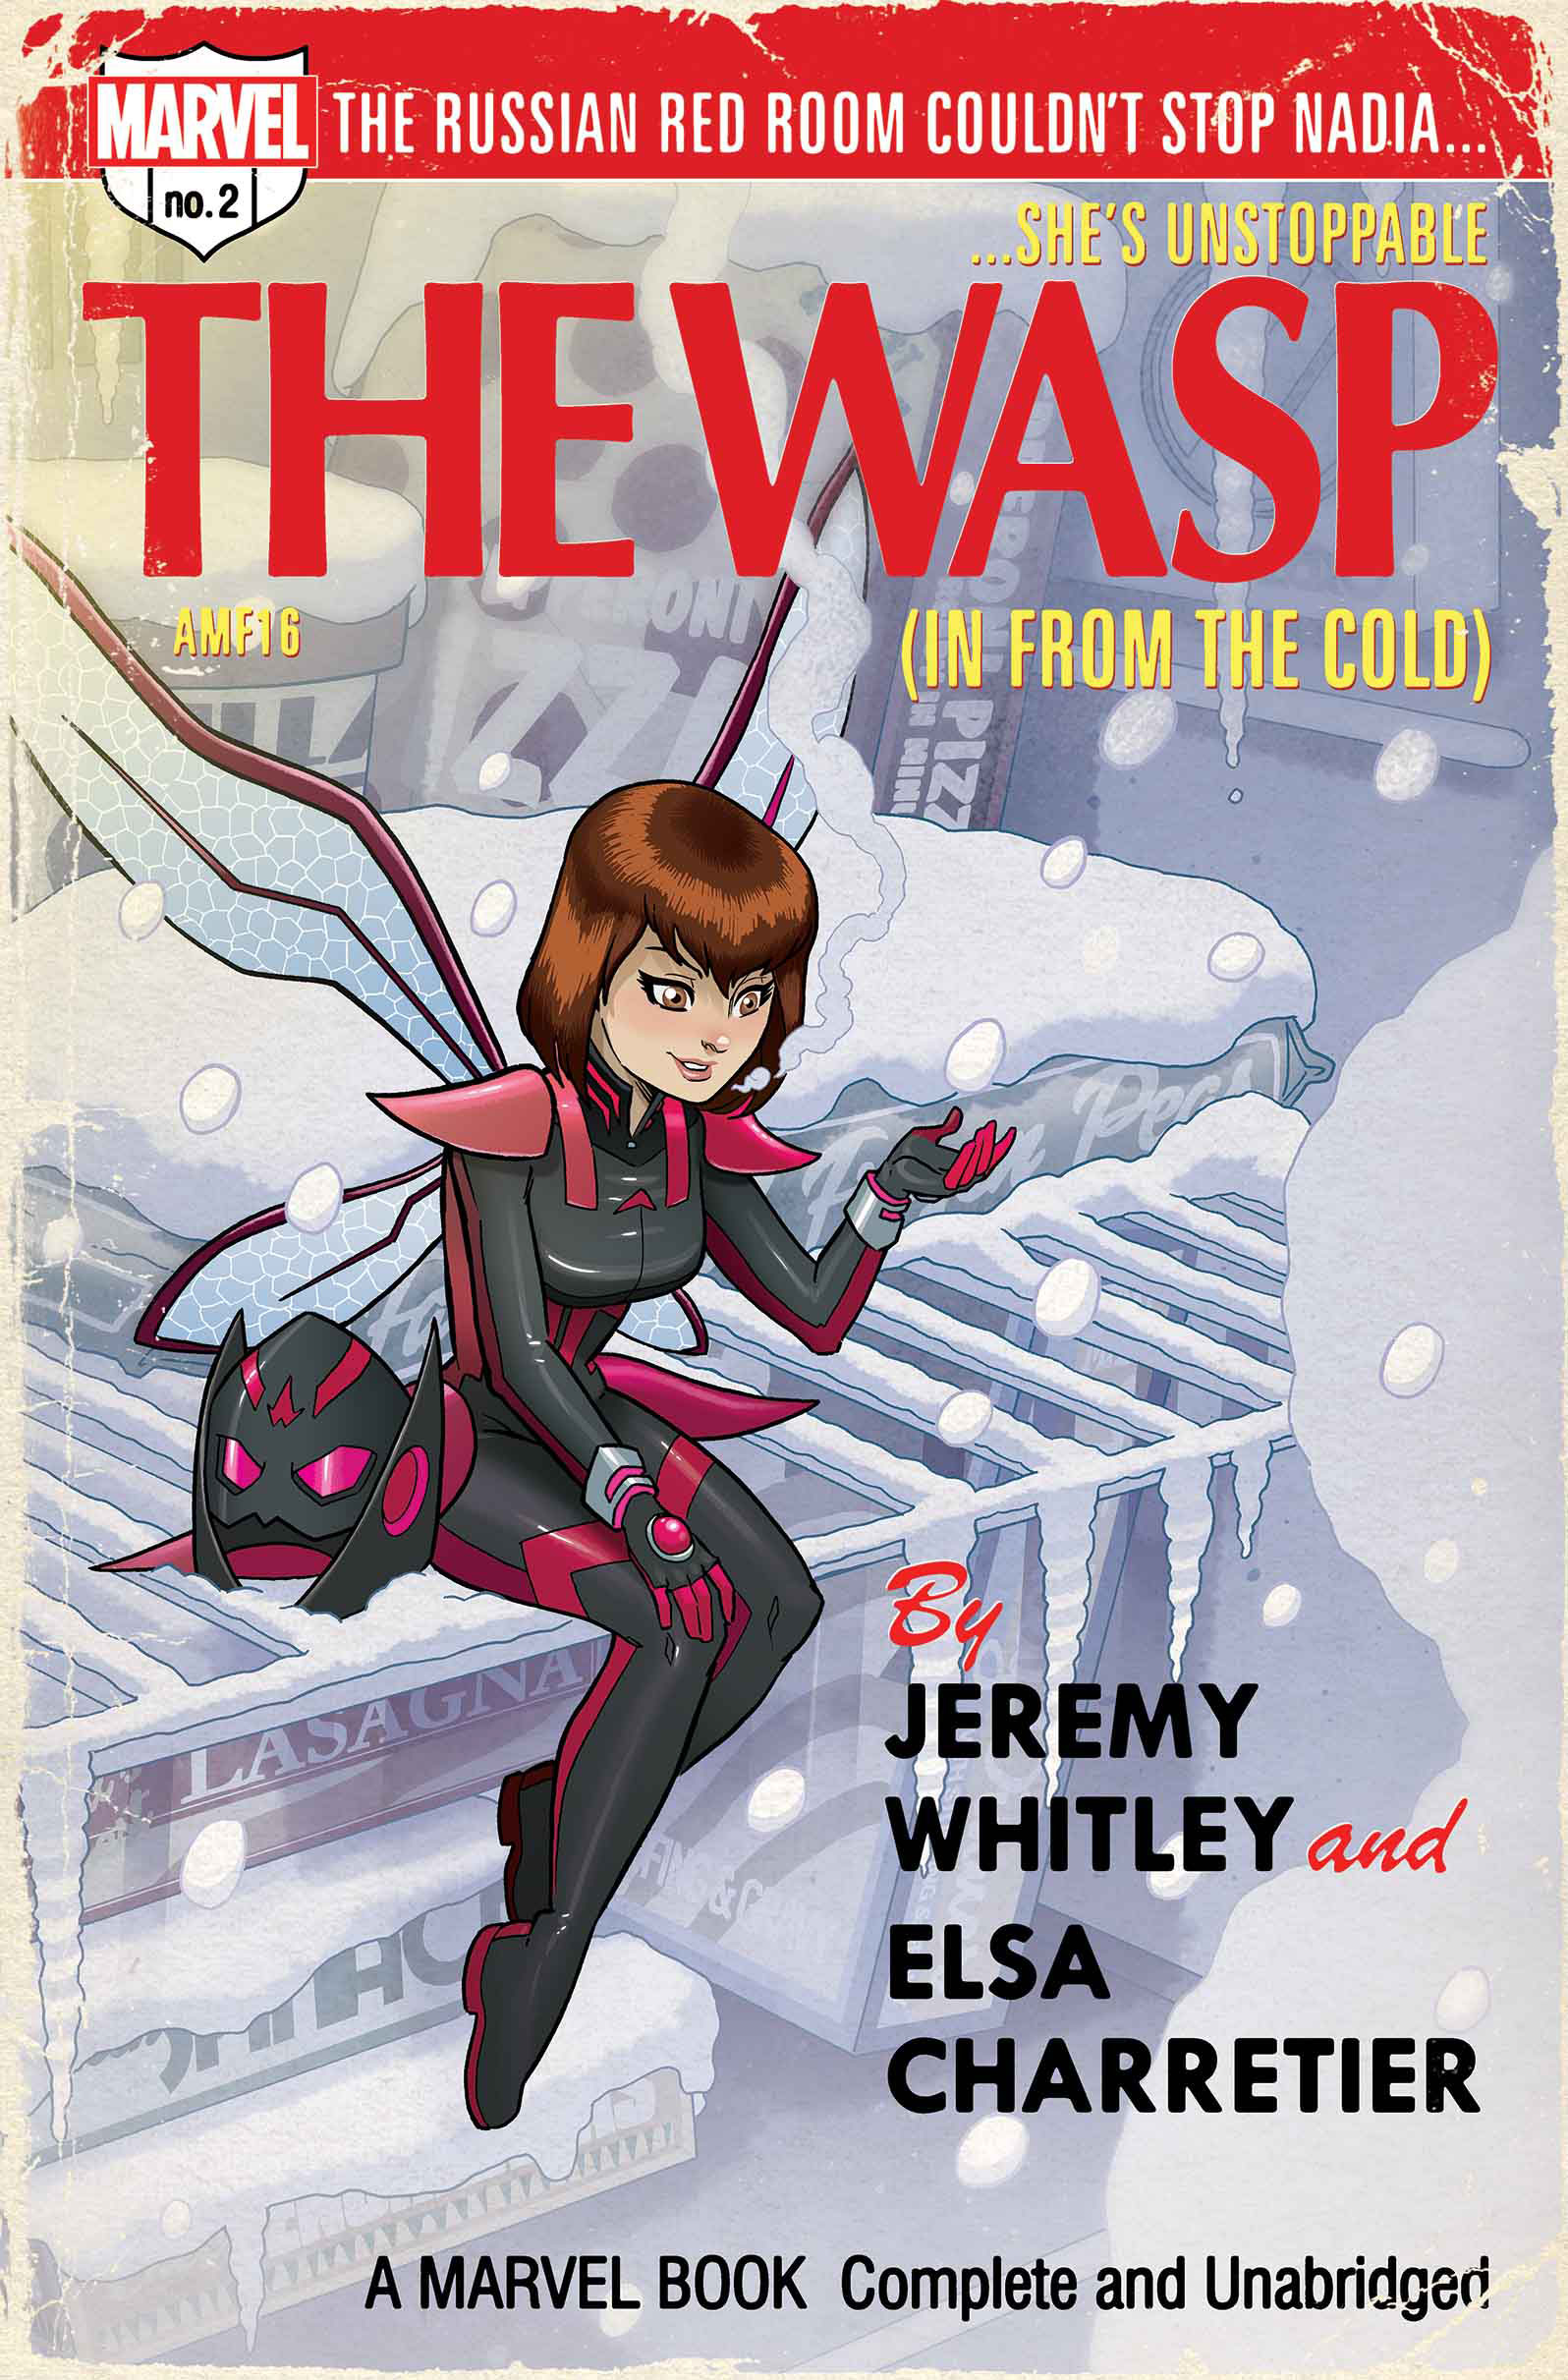 THE UNSTOPPABLE WASP #2 VARIANT